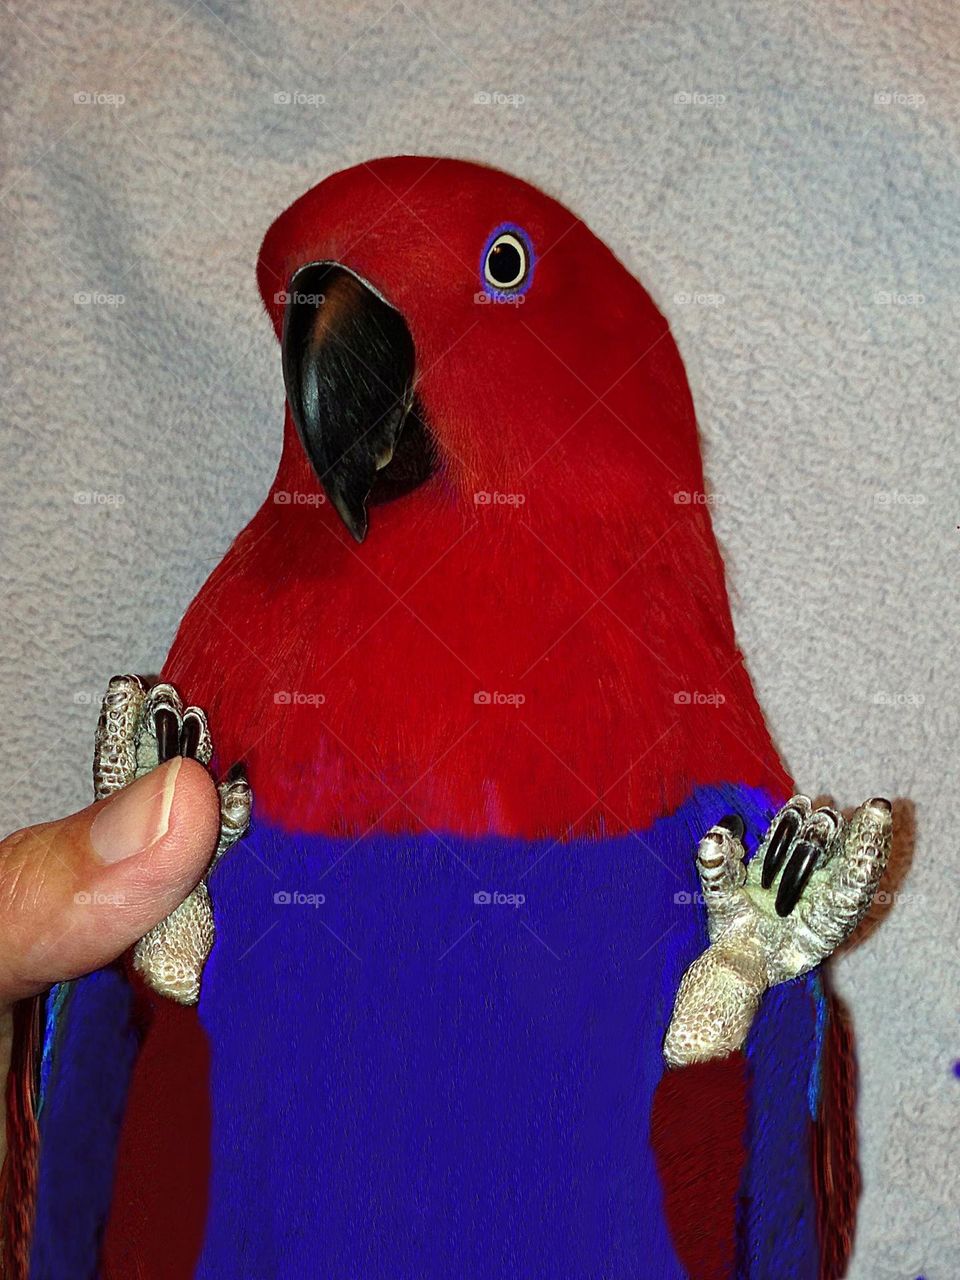 Total trust- Parrot and woman holding hands.